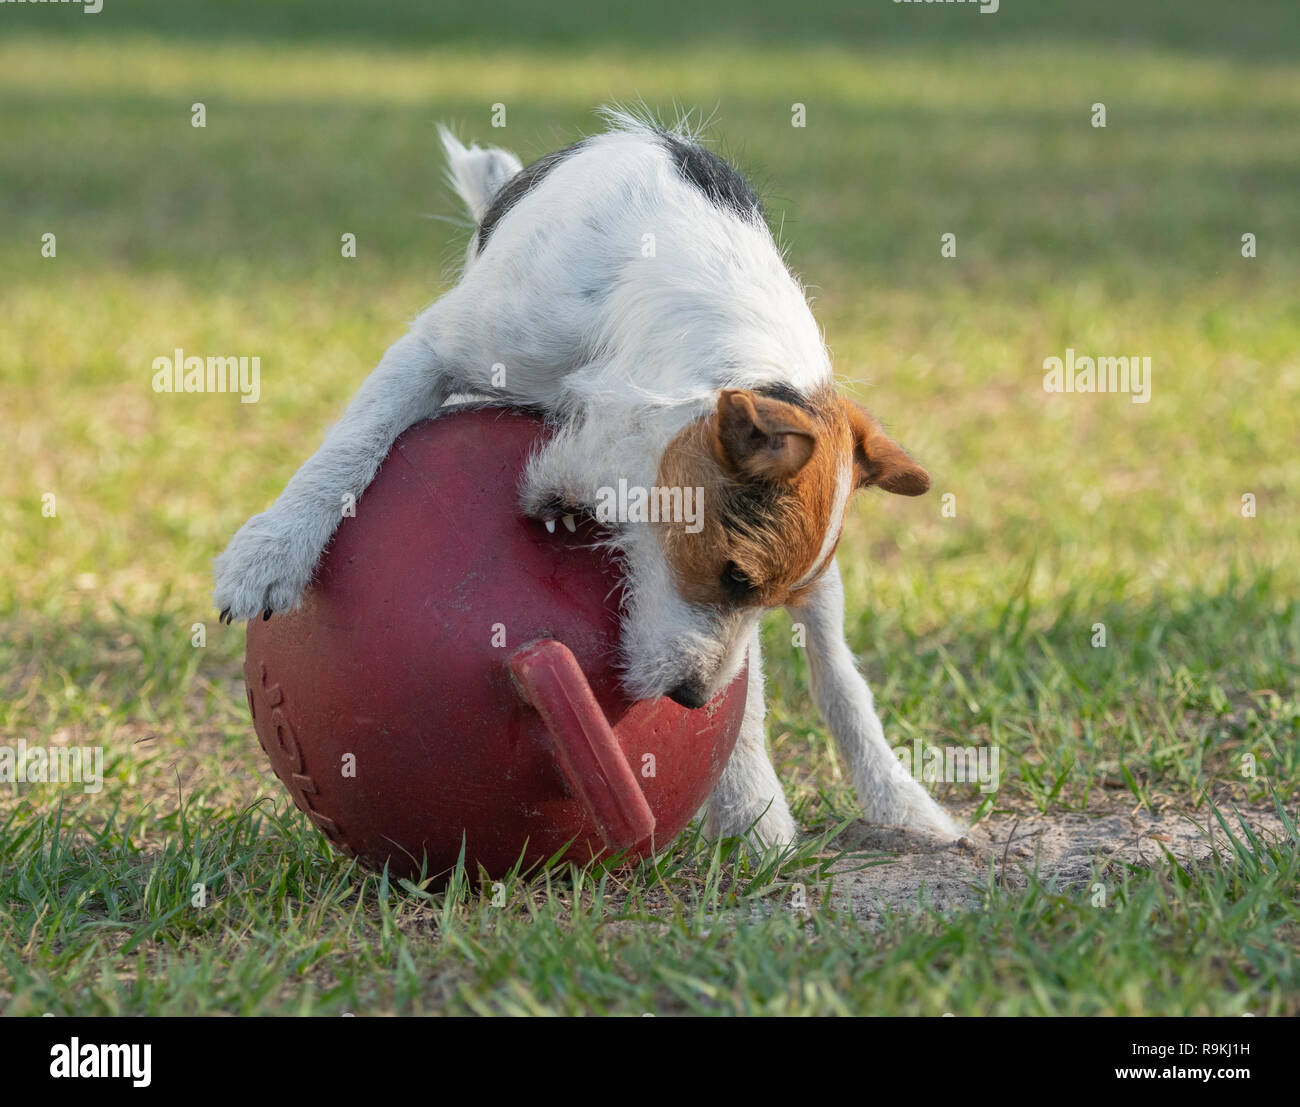 Jack Russel Terrier dog tries to bite large Jolly ball Stock Photo